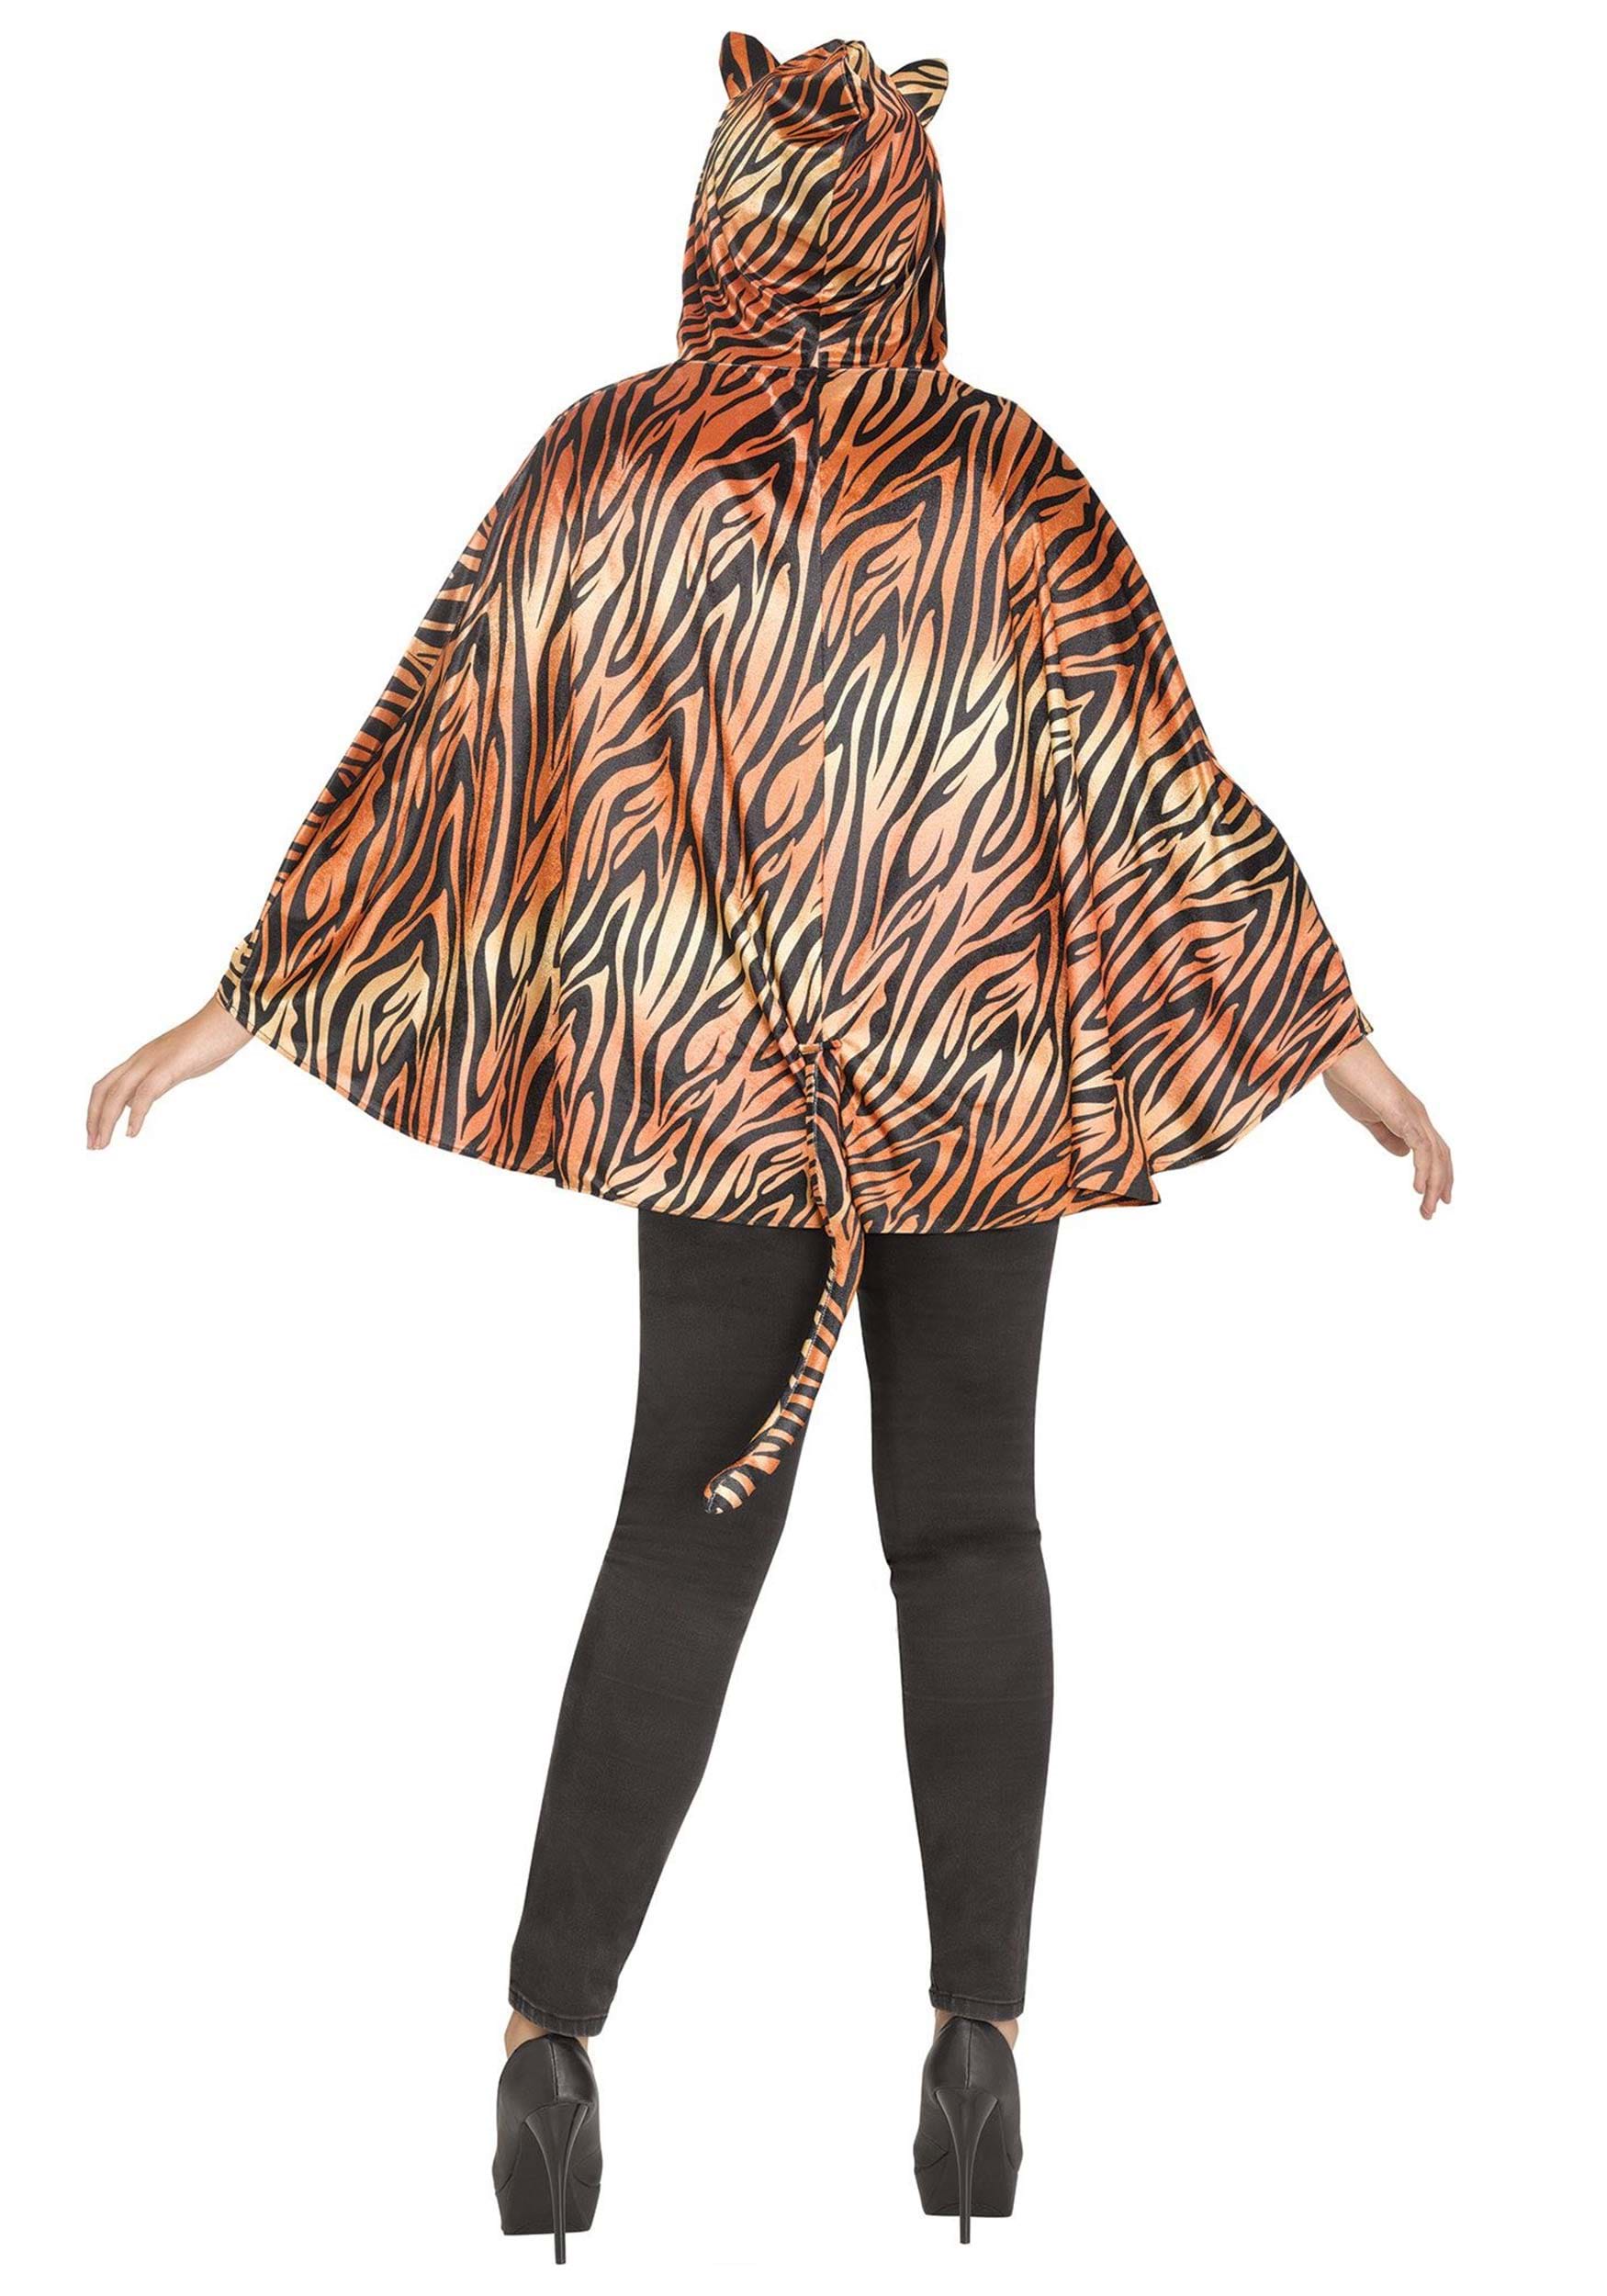 Tiger Poncho Costume for Women